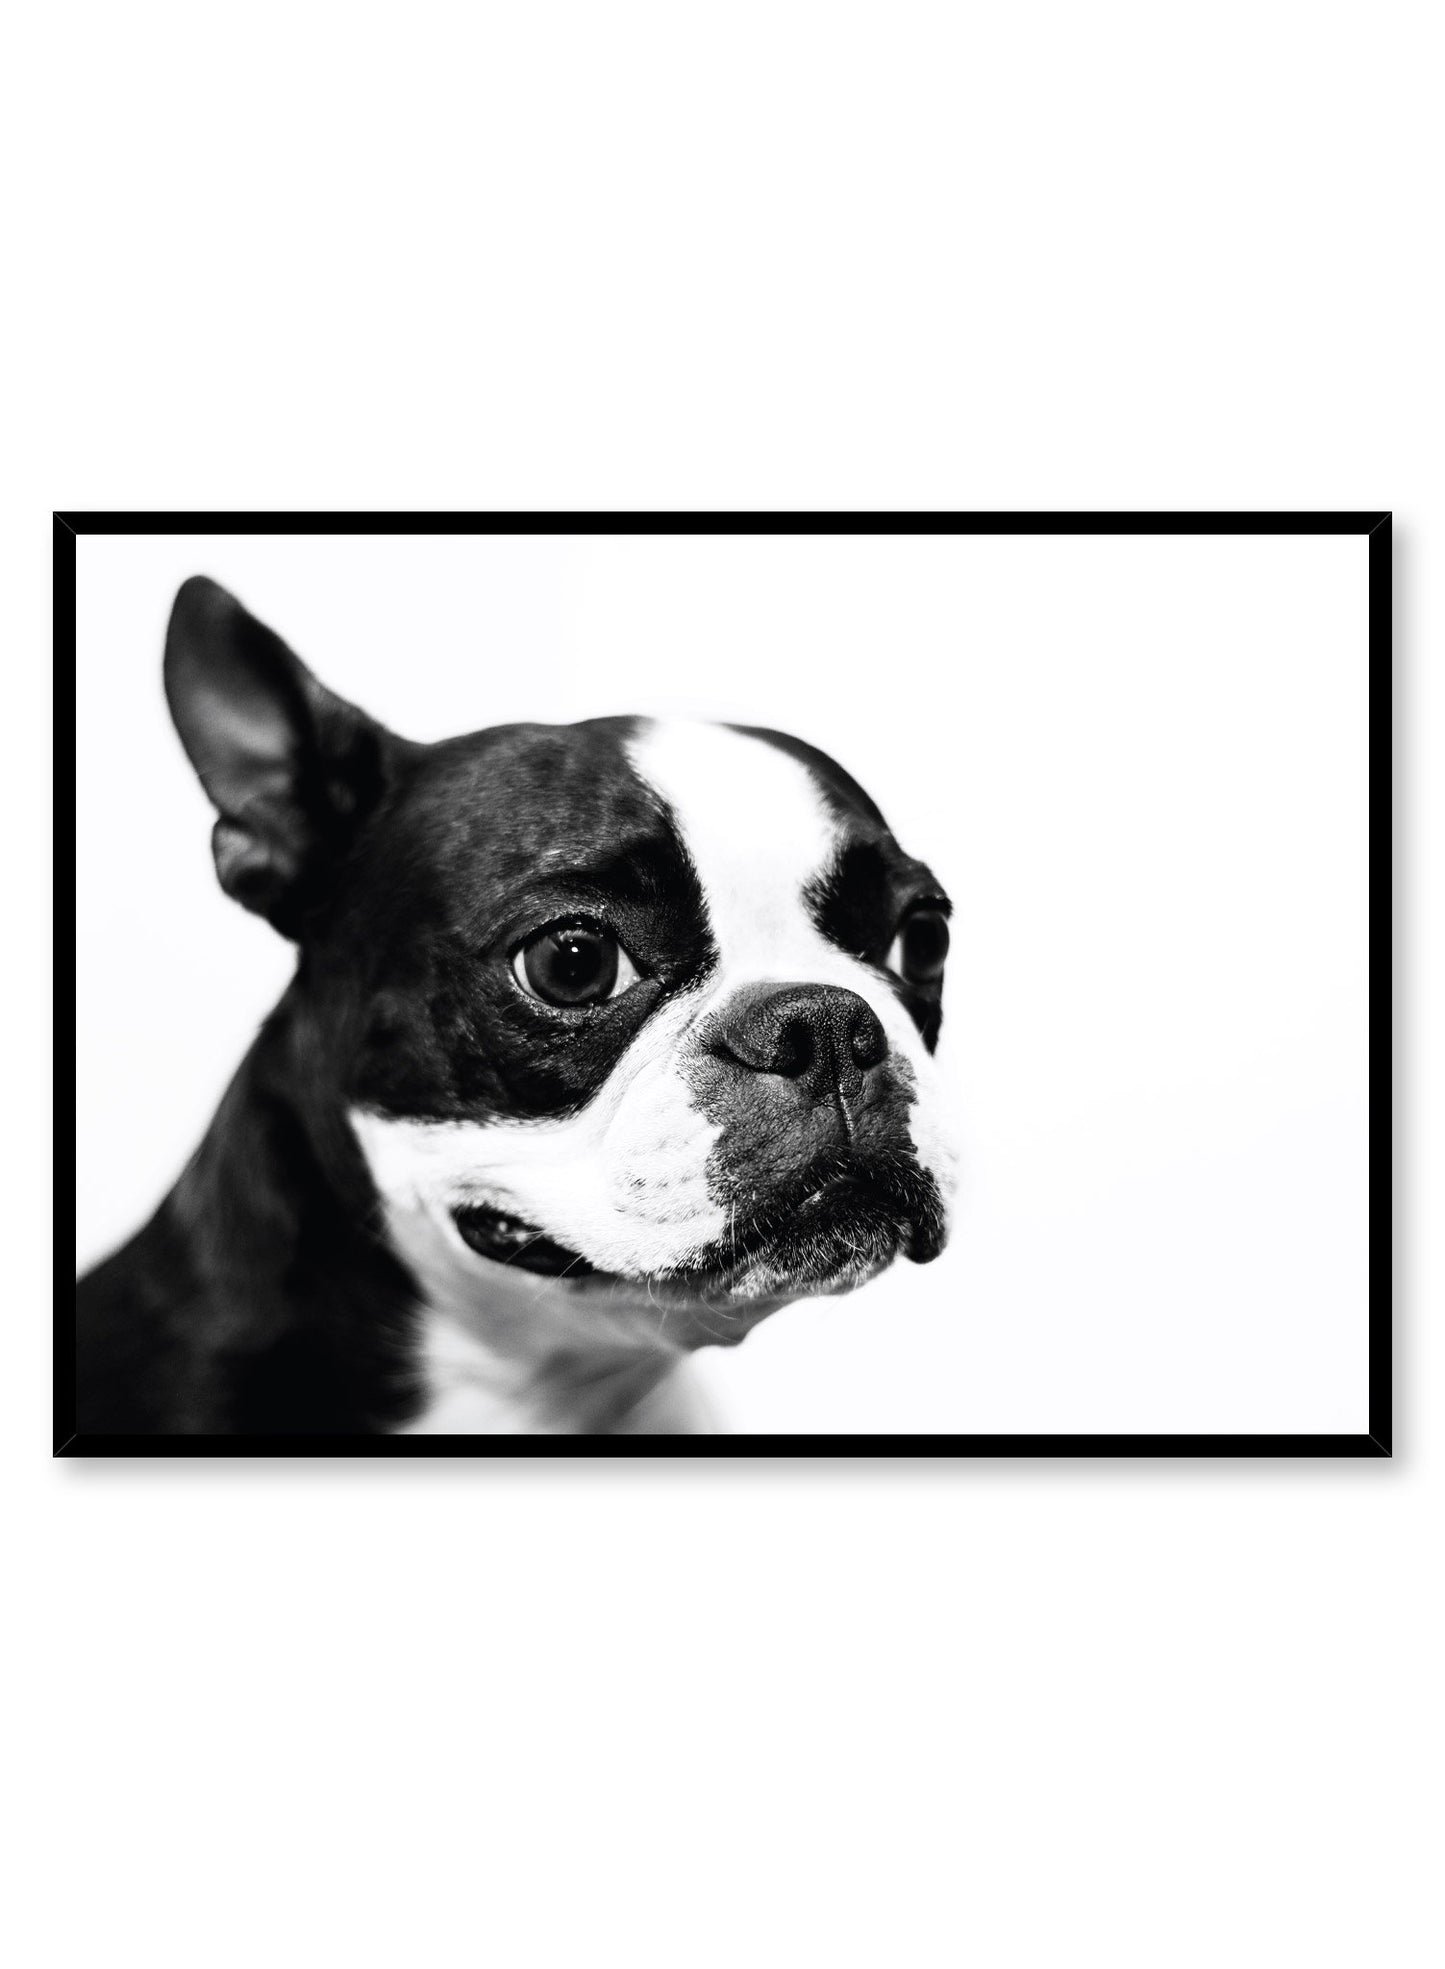 Kids nursery poster by Opposite Wall with black and white dog photography